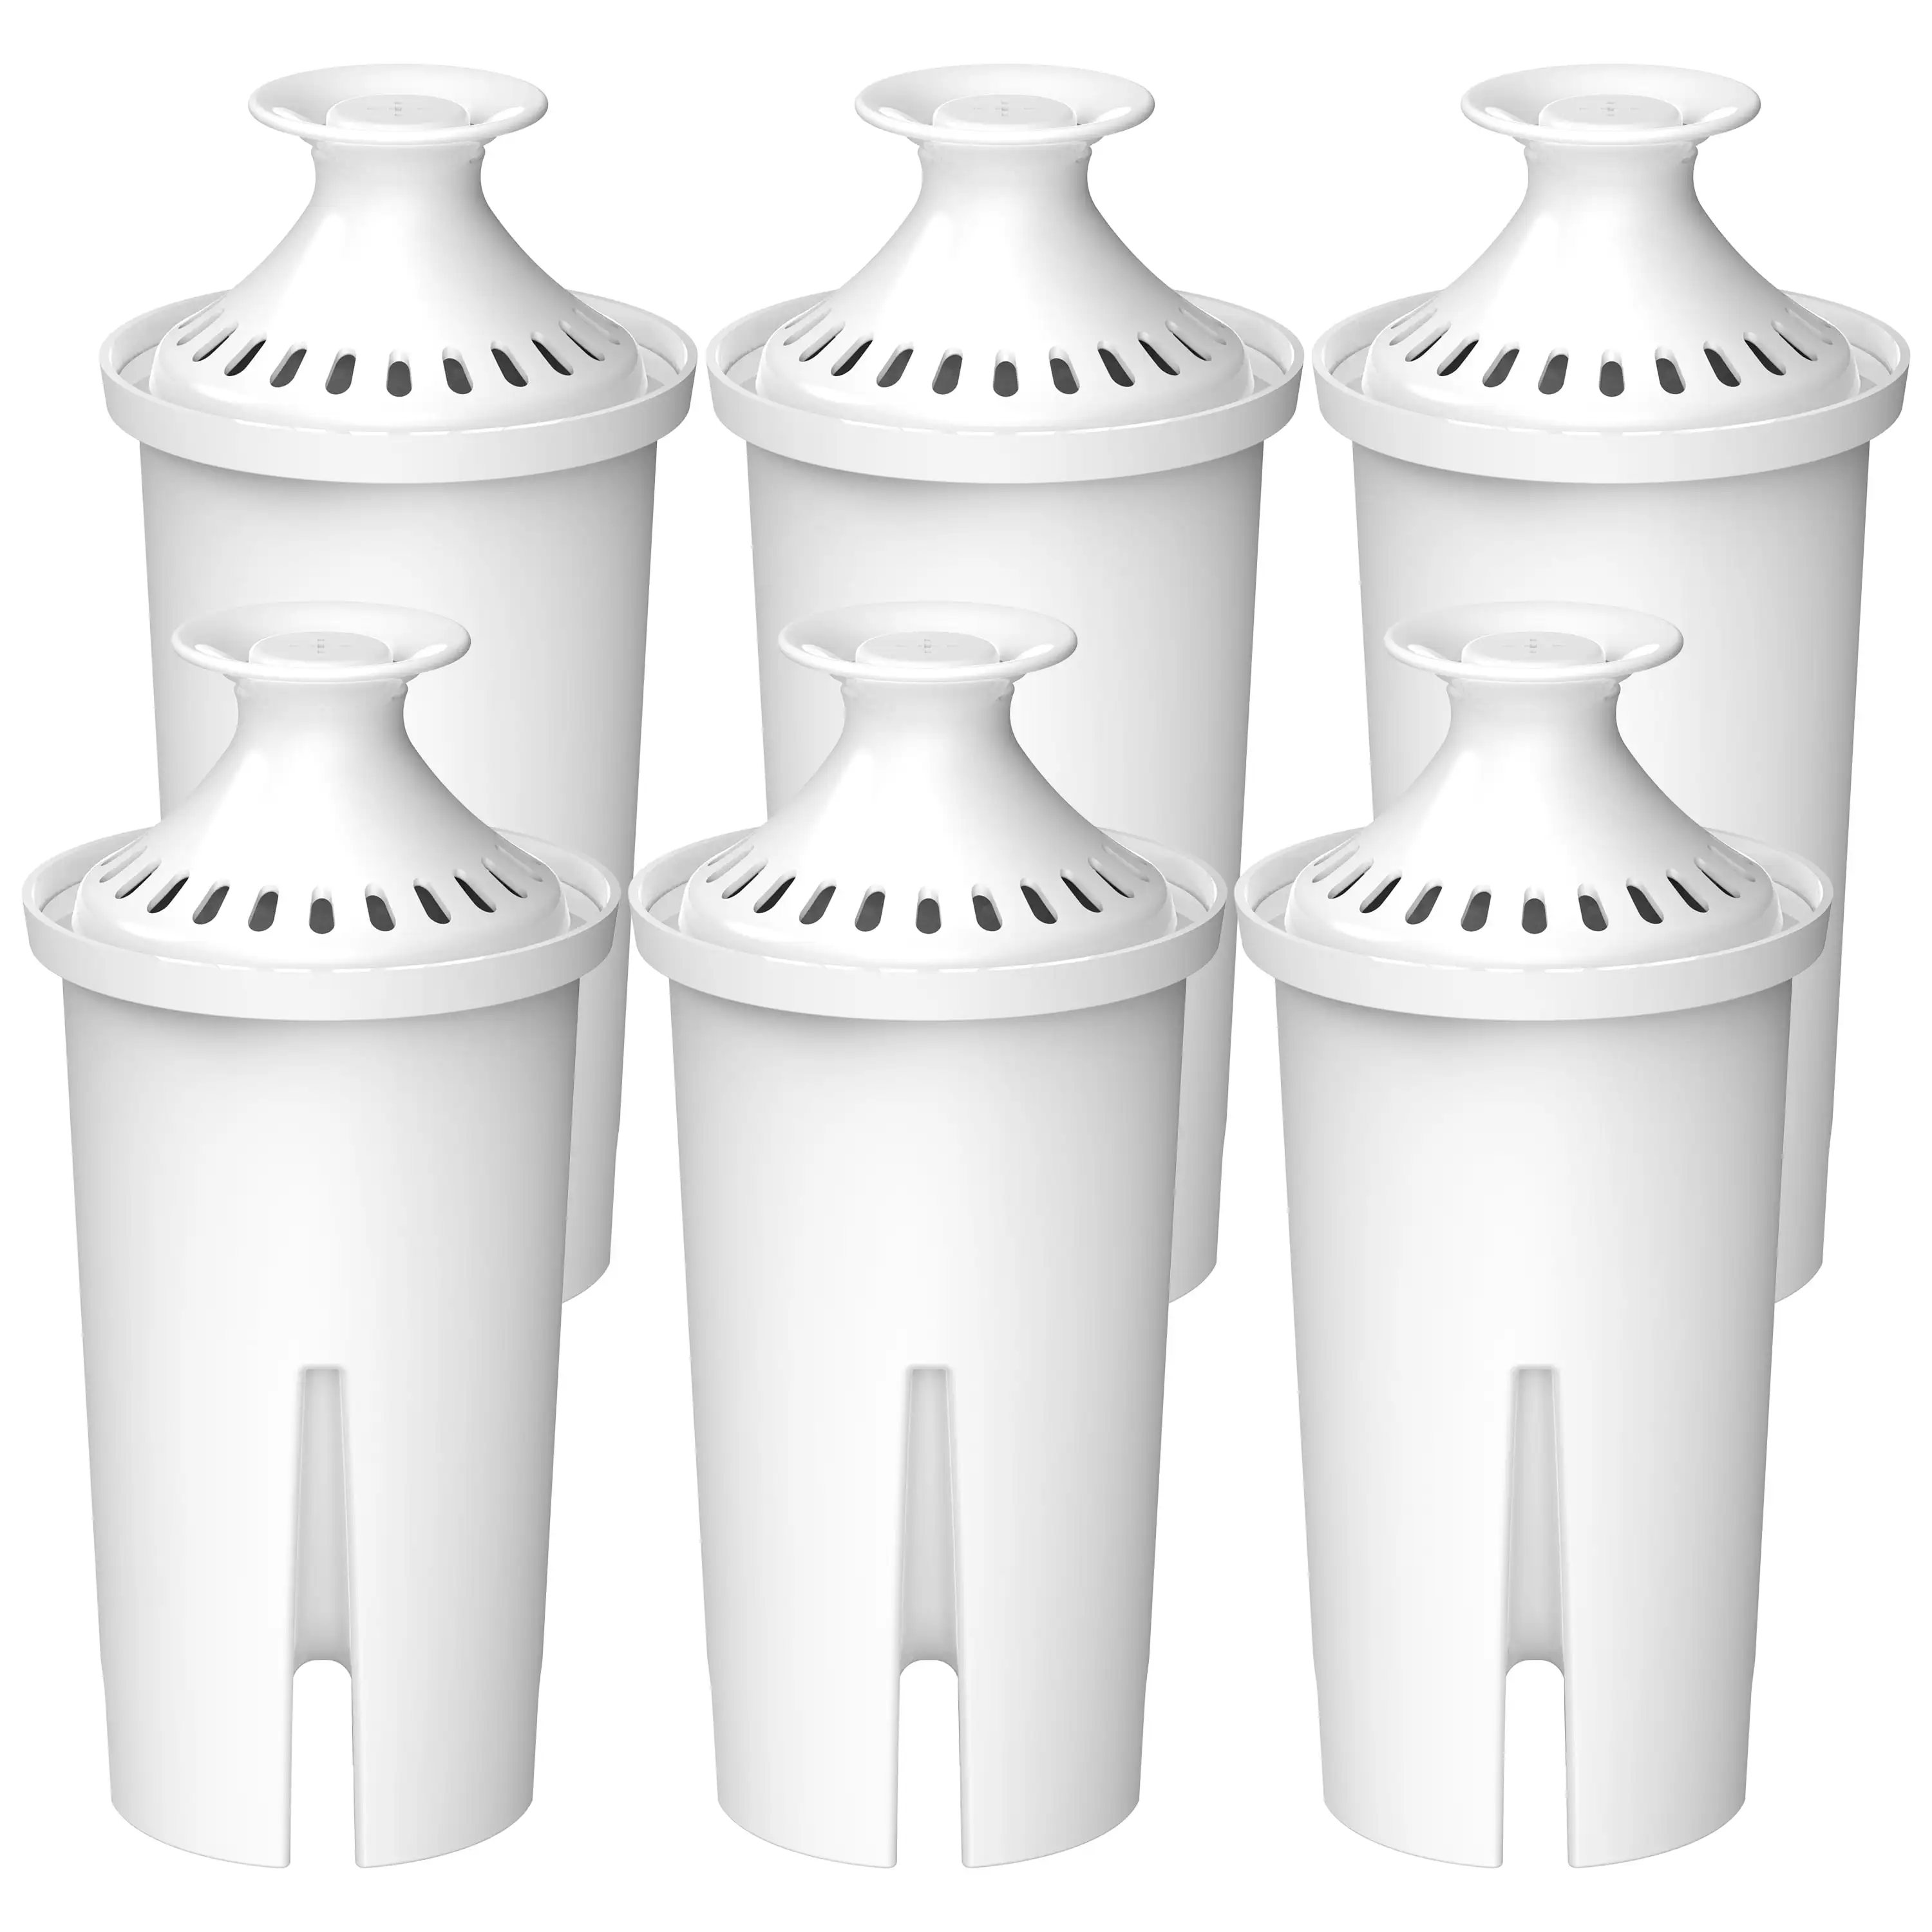 6 Pack Water Filter, Replacement for Brita Pitchers & Dispensers, Compatible with Brita Classic 35557, 987554, Mavea 107007, 766